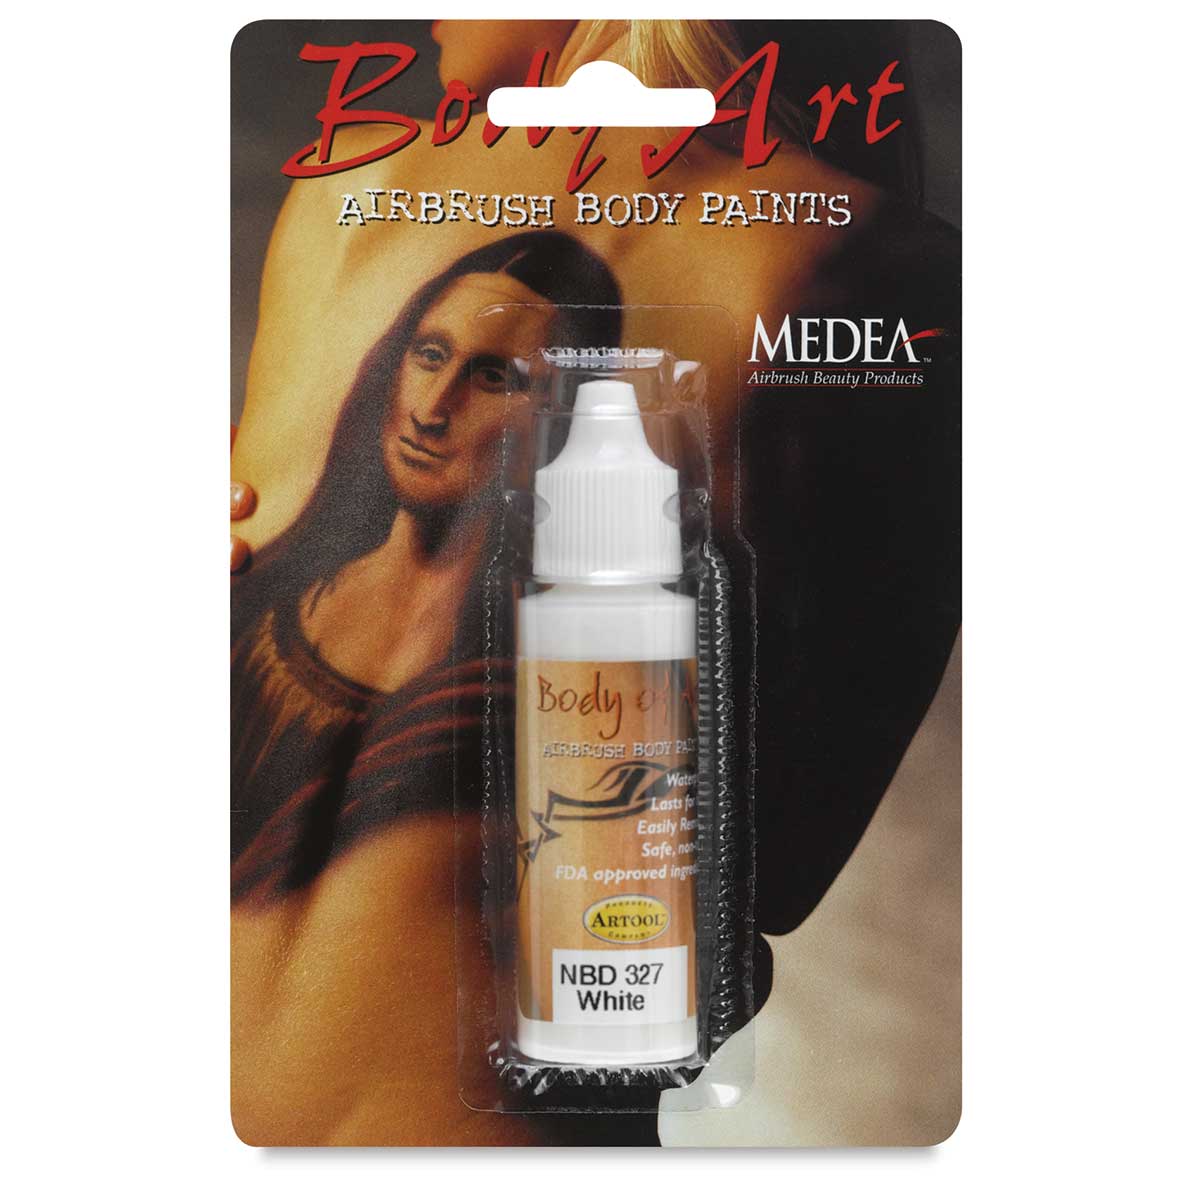 Medea Body-Art Airbrush Paints and Sets